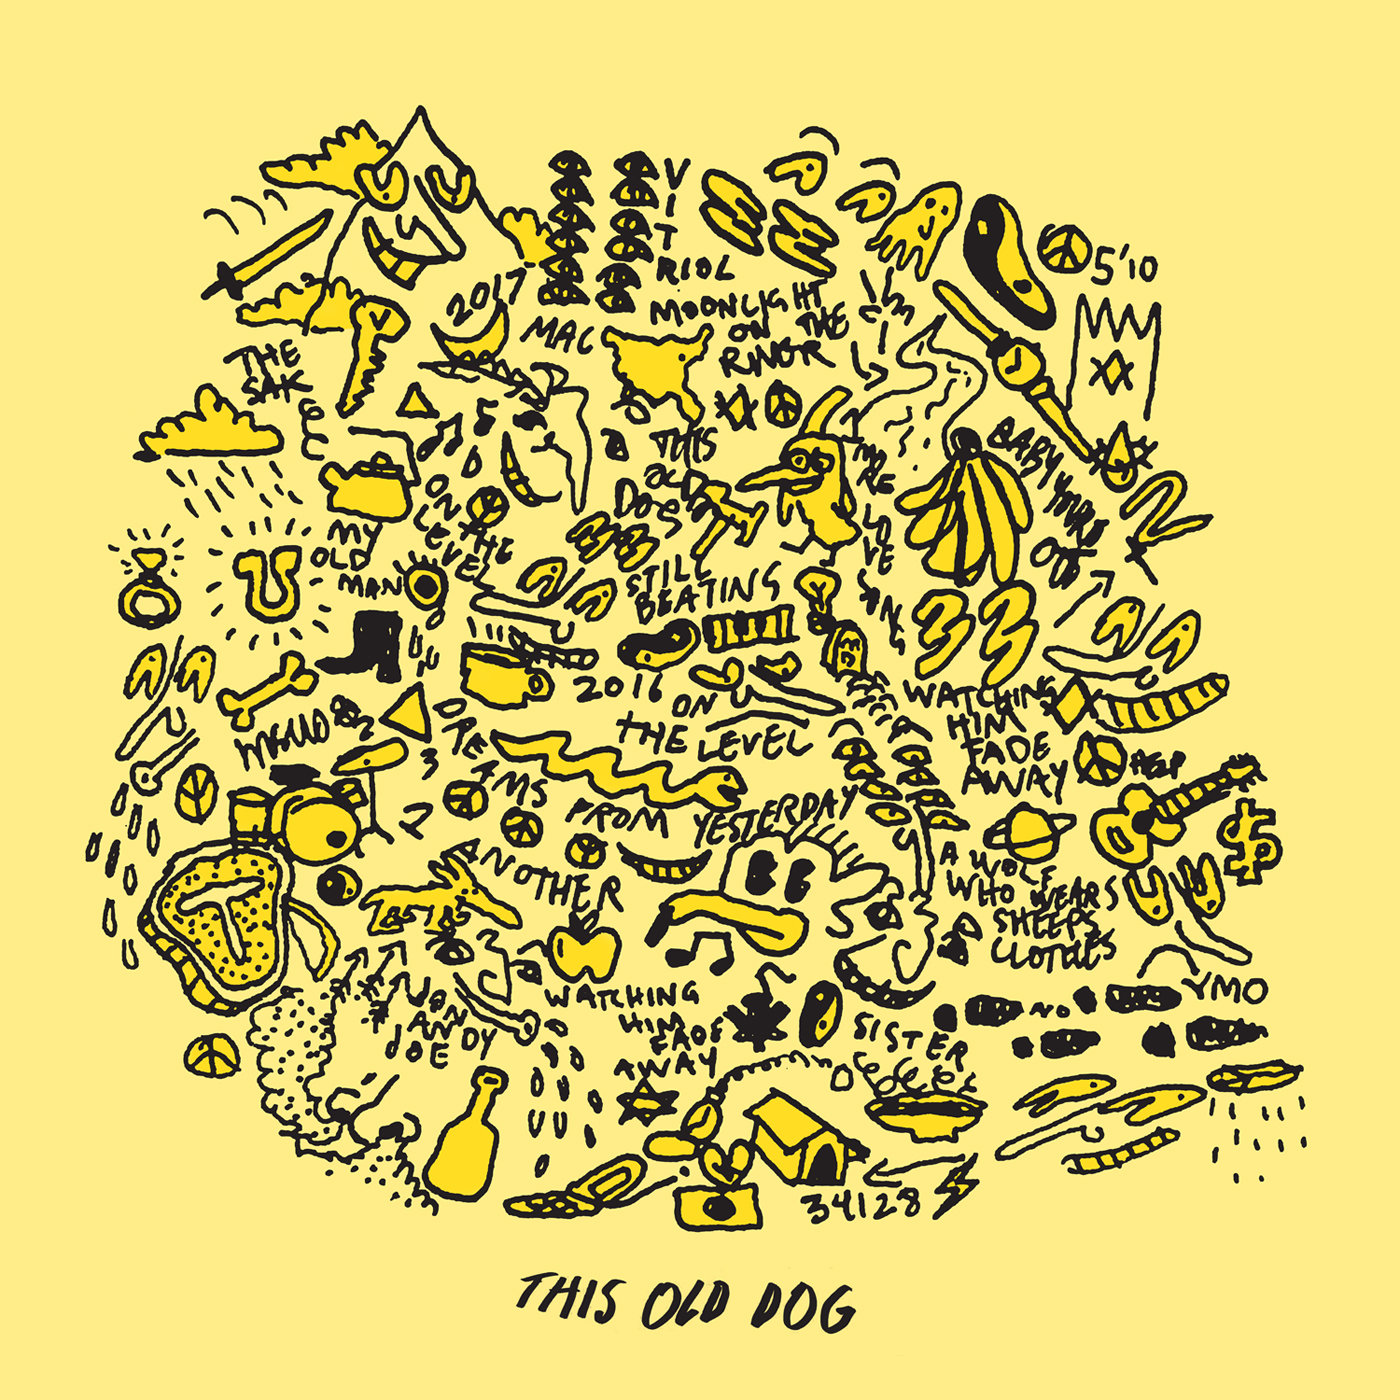 Mac DeMarco Announces New Album <i>This Old Dog</i>, Shares Title Track and “My Old Man”” title=”mac demarco this old dog album art” data-original-id=”224747″ data-adjusted-id=”224747″ class=”sm_size_full_width sm_alignment_center ” /></p>
<p><strong>Mac DeMarco, <em>This Old Dog<br />
</em></strong>1. “My Old Man”<br />
2. “This Old Dog”<br />
3. “Baby You’re Out”<br />
4. “For the First Time”<br />
5. “One Another”<br />
6. “Still Beating”<br />
7. “Sister”<br />
8. “Dreams From Yesterday”<br />
9. “A Wolf Who Wears Sheeps Clothes”<br />
10. “One More Love Song”<br />
11. “On the Level”<br />
12. “Moonlight on the River”<br />
13. “Watching Him Fade Away”</p>
</p></p></p><p>To see our running list of the top 100 greatest rock stars of all time, <a href=